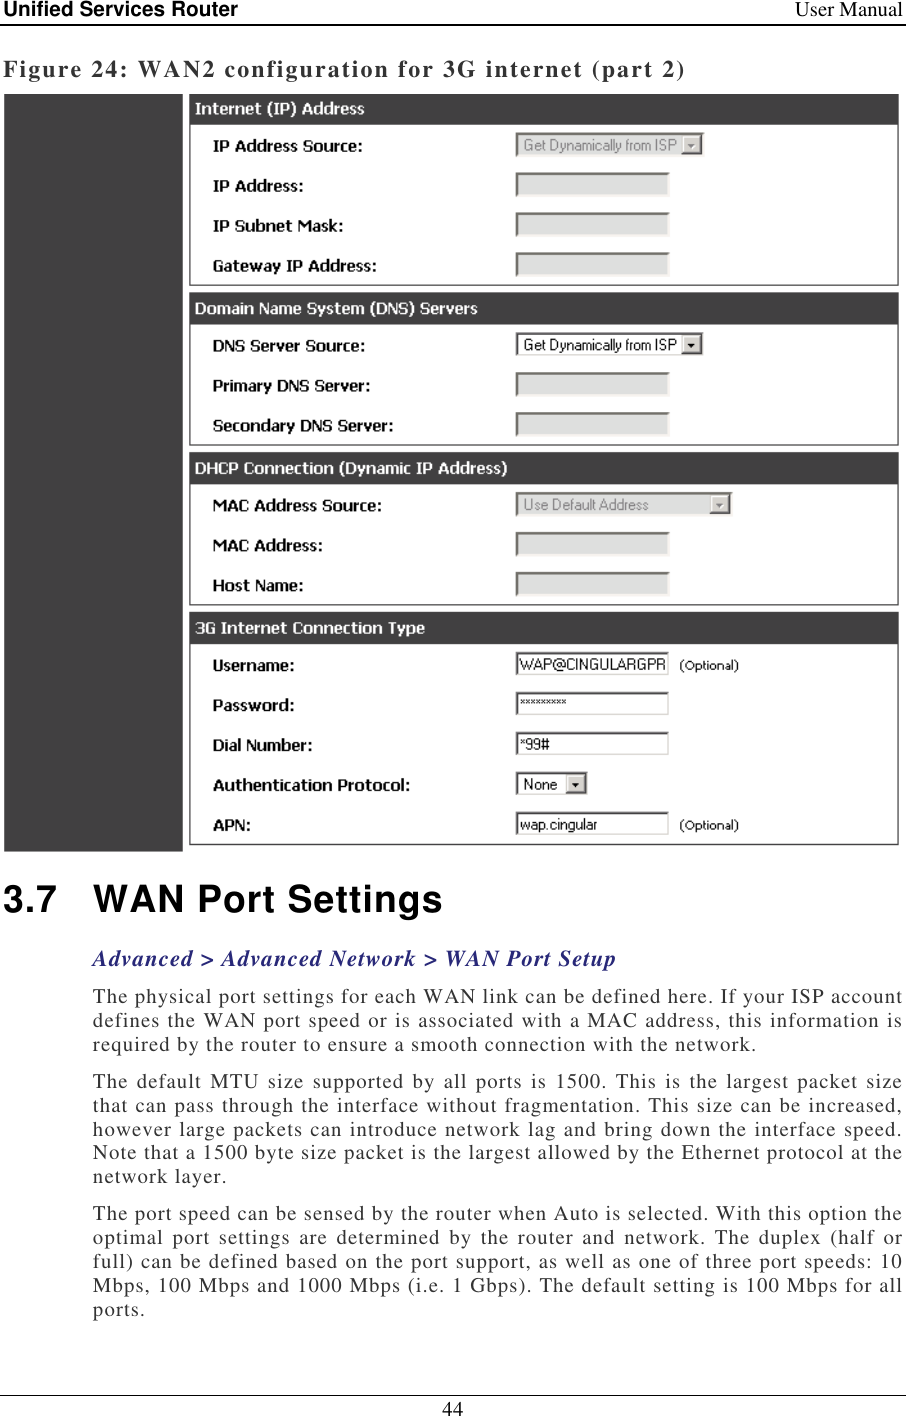 Unified Services Router    User Manual 44  Figure 24: WAN2 configuration for 3G internet (part 2)  3.7  WAN Port Settings Advanced &gt; Advanced Network &gt; WAN Port Setup The physical port settings for each WAN link can be defined here. If your ISP account defines the WAN port speed or is associated with a MAC address, this information is required by the router to ensure a smooth connection with the network.  The  default  MTU size  supported  by  all ports  is 1500.  This  is  the largest  packet  size that can pass through the interface without fragmentation. This size can be increased, however large packets can introduce network lag and bring down the interface speed. Note that a 1500 byte size packet is the largest allowed by the Ethernet protocol at the network layer.  The port speed can be sensed by the router when Auto is selected. With this option the optimal  port  settings  are  determined  by  the  router  and  network.  The  duplex  (half  or full) can be defined based on the port support, as well as one of three port speeds: 10 Mbps, 100 Mbps and 1000 Mbps (i.e. 1 Gbps). The default setting is 100 Mbps for all ports. 